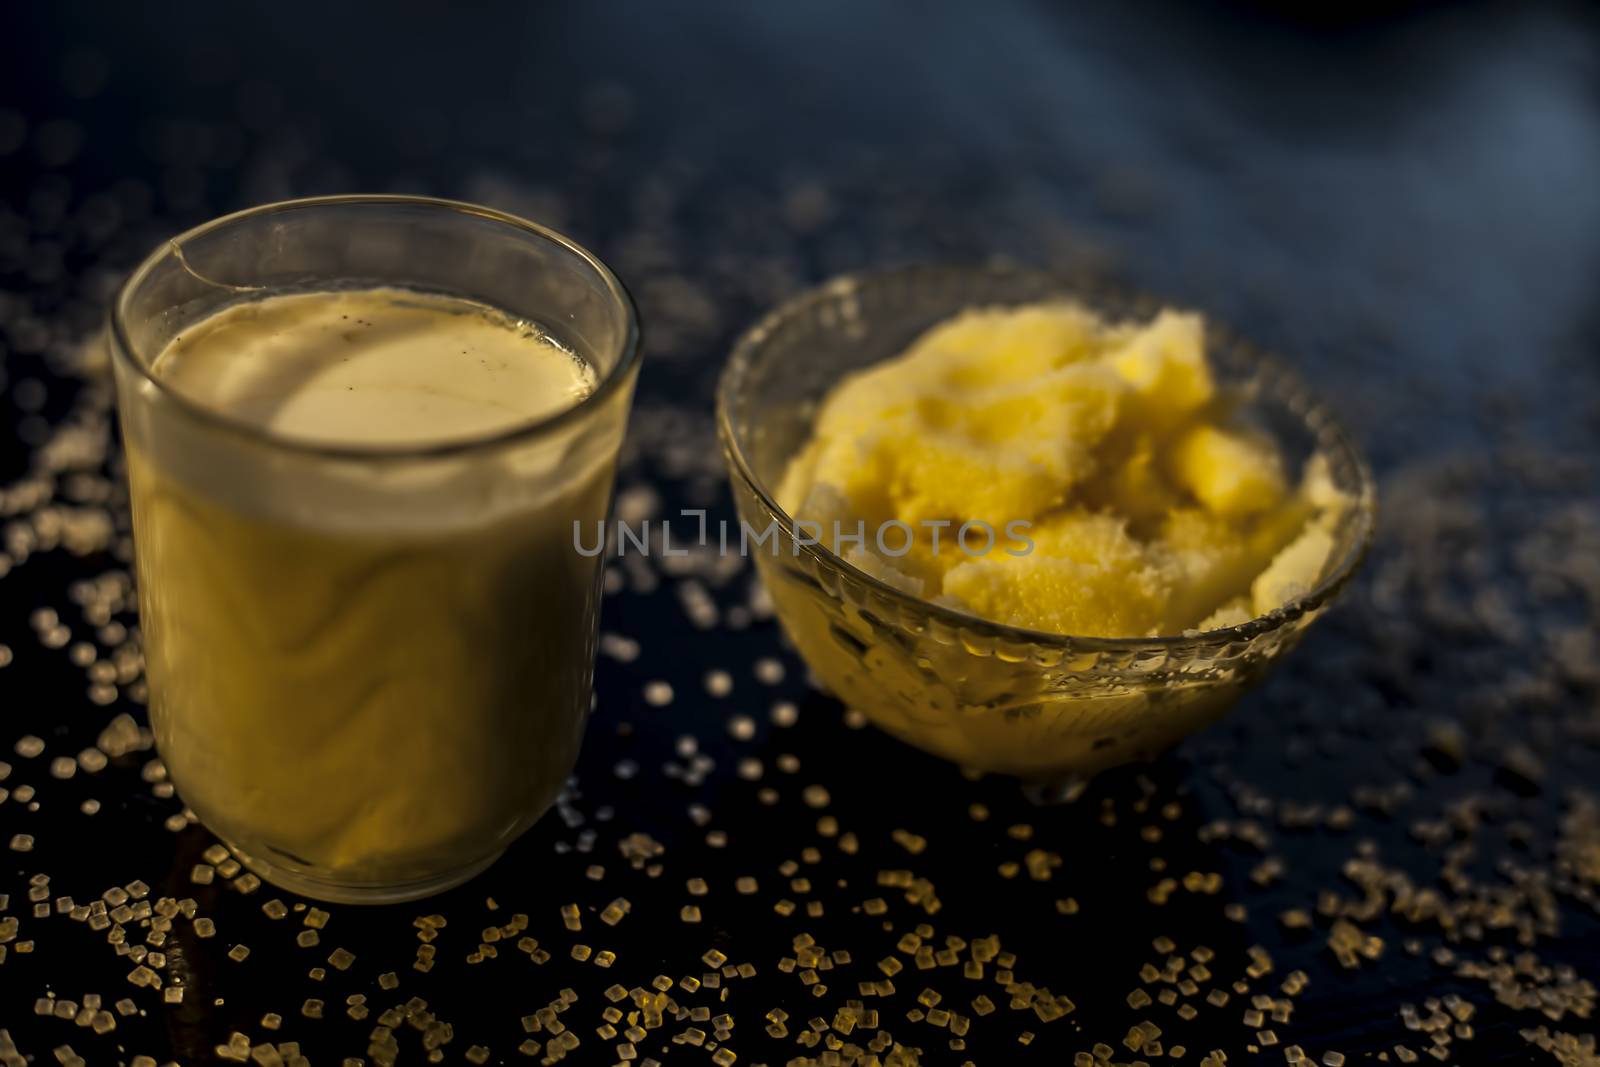 Close up of glass bowl of pure milk well mixed with hot milk in it on black wooden glossy surface along with raw ghee clarified butter and some sugar crystals spread on the surface. Horizontal shot.;